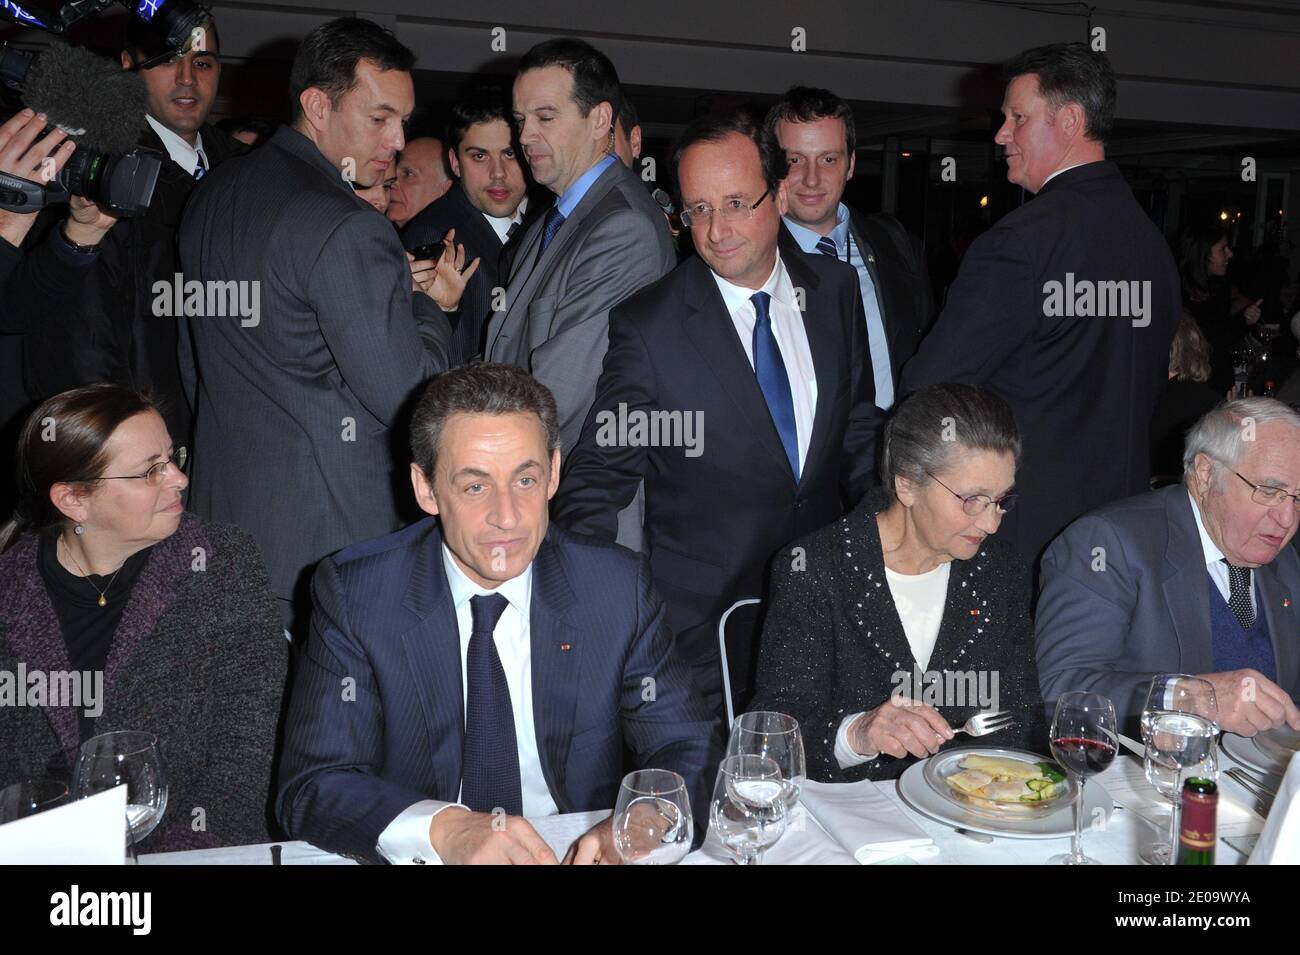 Socialist Party candidate for the 2012 French presidential election Francois Hollande arrives to speak with French President Nicolas Sarkozy as he sits near Aviva Shalit, Simone and Antoine Veil during the 'CRIF' (French Jewish community representative council) annual dinner, held at Pavillon d'Armenonville, in Paris, France on February 8, 2012. Photo by Christophe Guibbaud/ABACAPRESS.COM Stock Photo